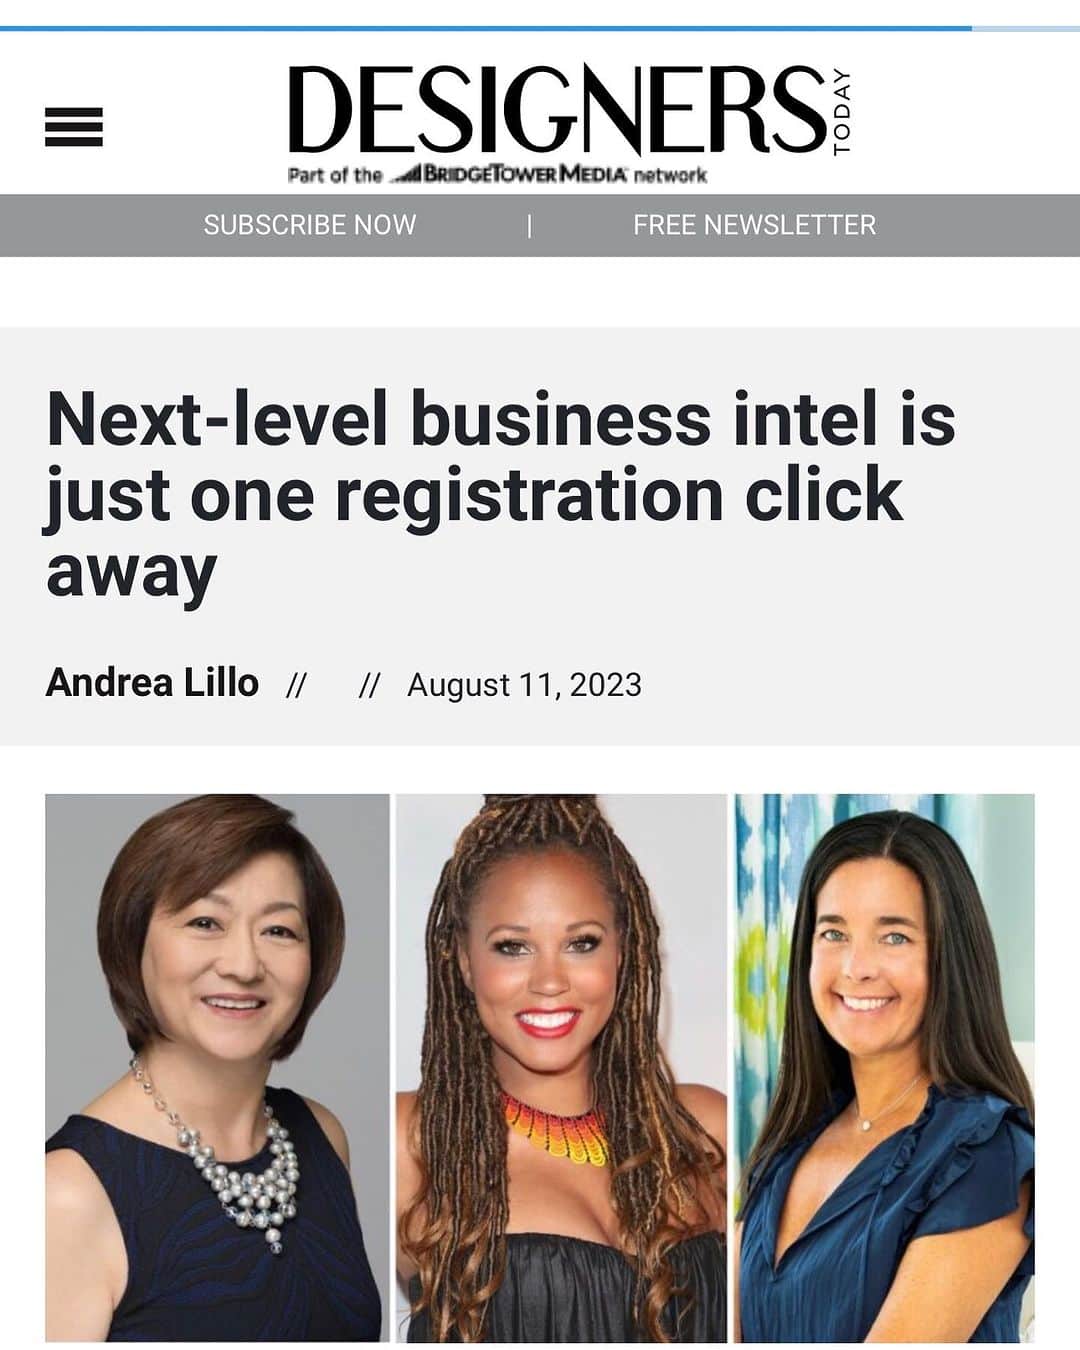 Reiko Lewisのインスタグラム：「I am honored to announce that I am taking the role of speaker of the event on August 29 (10 am Hawaii time. The details to see below two links) and talk to the audience about the aging-in-place today and future as an industry leader. I hope you can take time to participate in the event.  大変光栄なことに、8月29日（ハワイ時間午前10時）に開催されるイベントのスピーカーをつとめさせていただくことになりました。業界のリーダーとして、高齢化の現在と未来について聴衆の皆さんにお話しすることになりました。ご多忙中とは存じますが、万障お繰り合わせの上、ご参加くださいますようお願い申し上げます。イベント情報と参加申し込みのリンクは下記になります。よろしくお願いします。 Event information:   https://www.designerstoday.com/news/next-level-business-intel-is-just-one-registration-click-away/     Registration site of the event is:  https://web.cvent.com/event/68cca5e7-8bd1-489c-817b-753c13a0484e/regProcessStep1     #interiordesign  #aginginplace  #seniorresidencedesign  #interiordesignfuture  #designerstoday  #ventusdesign  #happyseniorliving  #safeseniorliving」